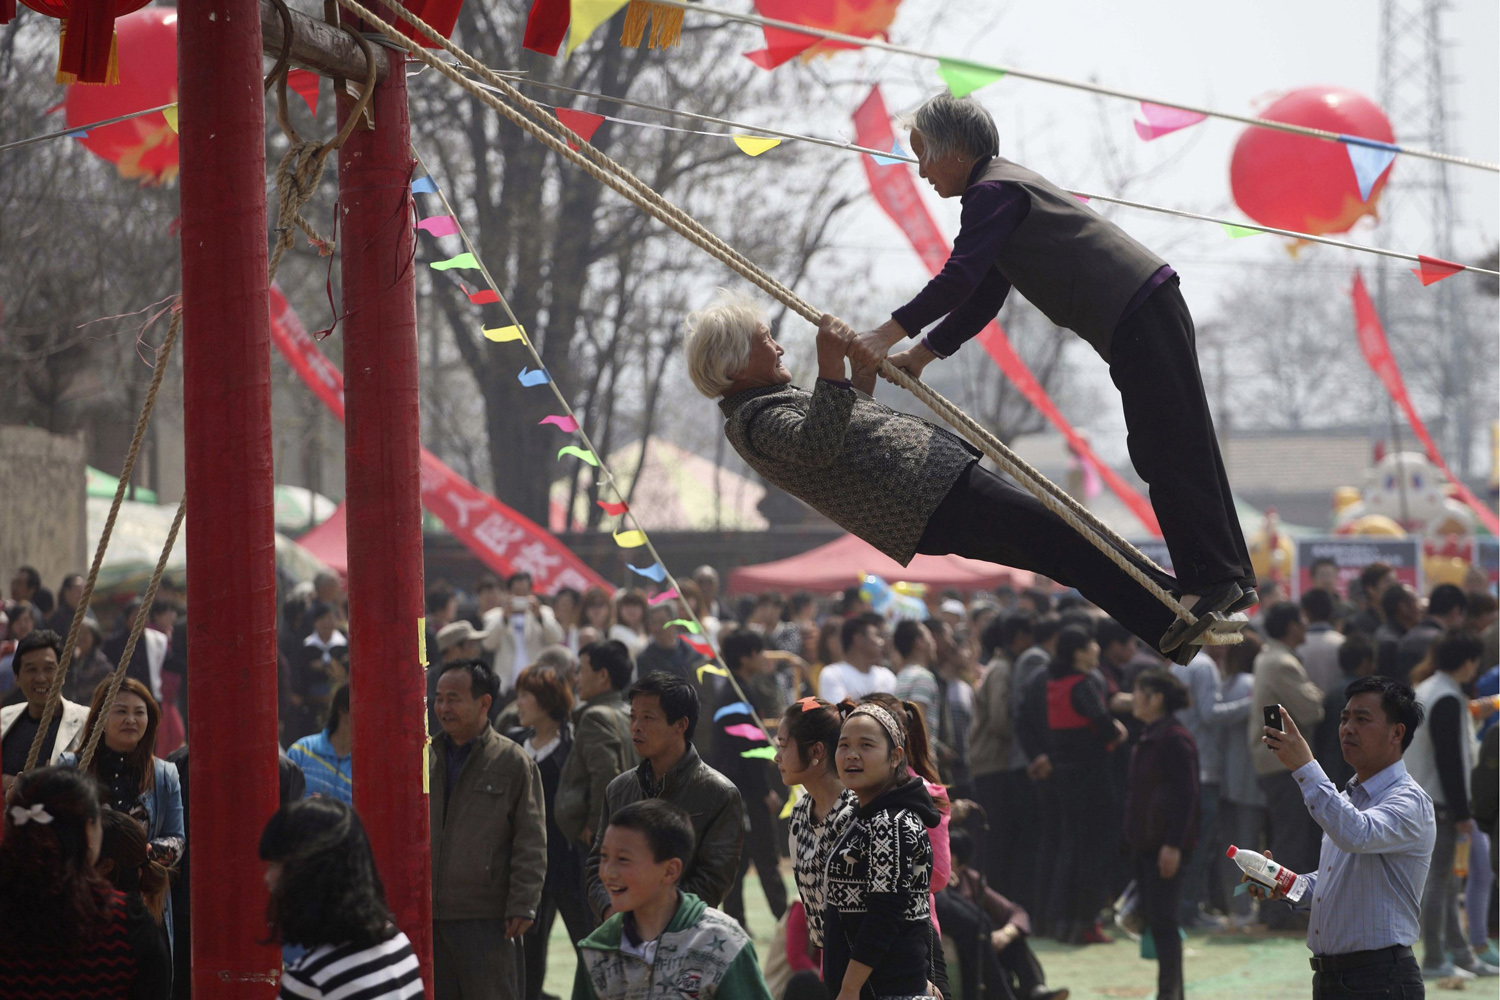 Women play on a swing during a swing festival in Huayin